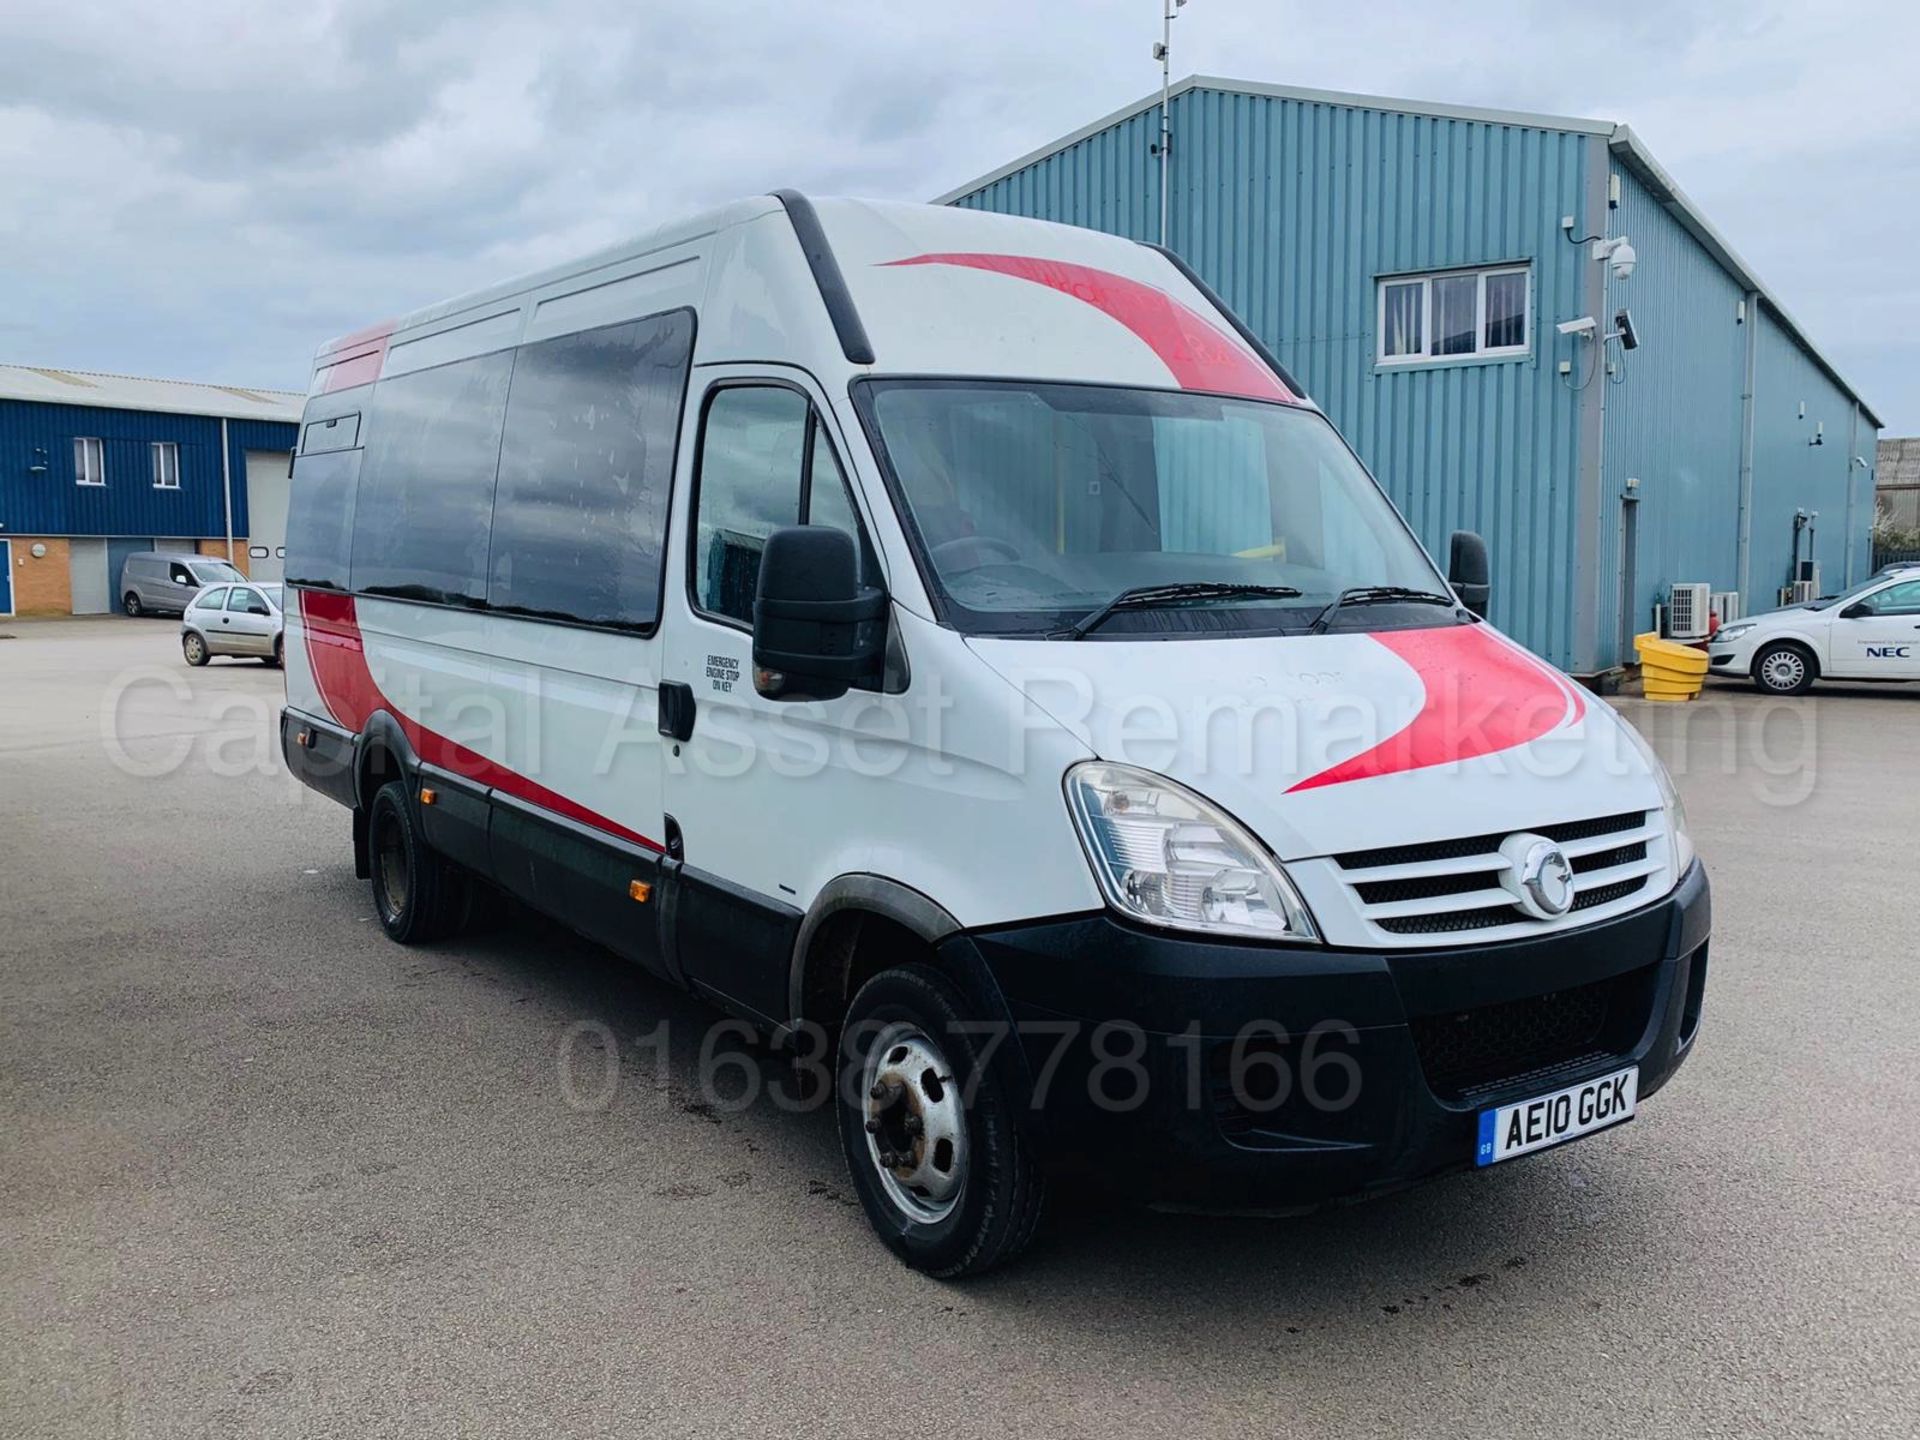 (ON SALE) IVECO DAILY *LWB - 16 SEATER MINI-BUS / COACH* (2010) '3.0 DIESEL - 146 BHP' *ELEC RAMP* - Image 11 of 32